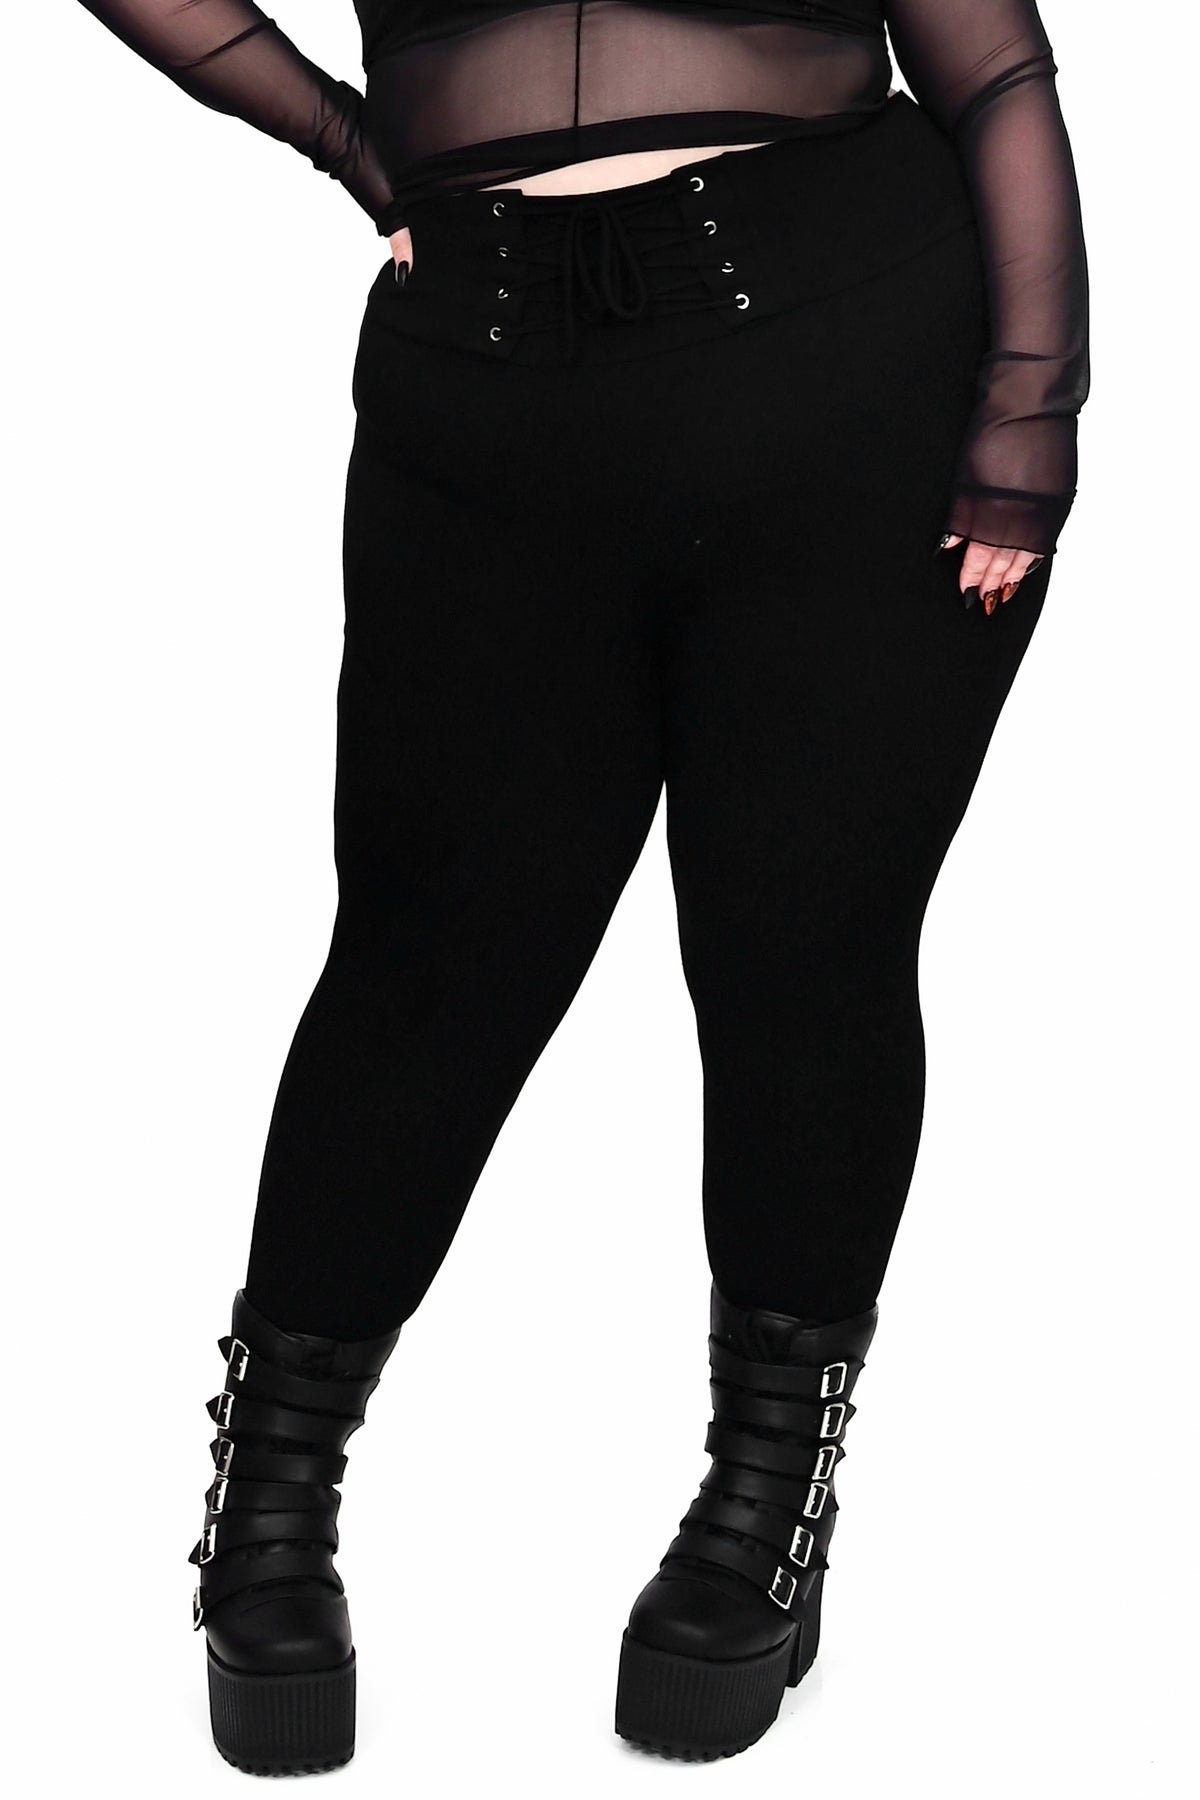 Black Front Lace Up Leggings - Buy Fashion Wholesale in The UK